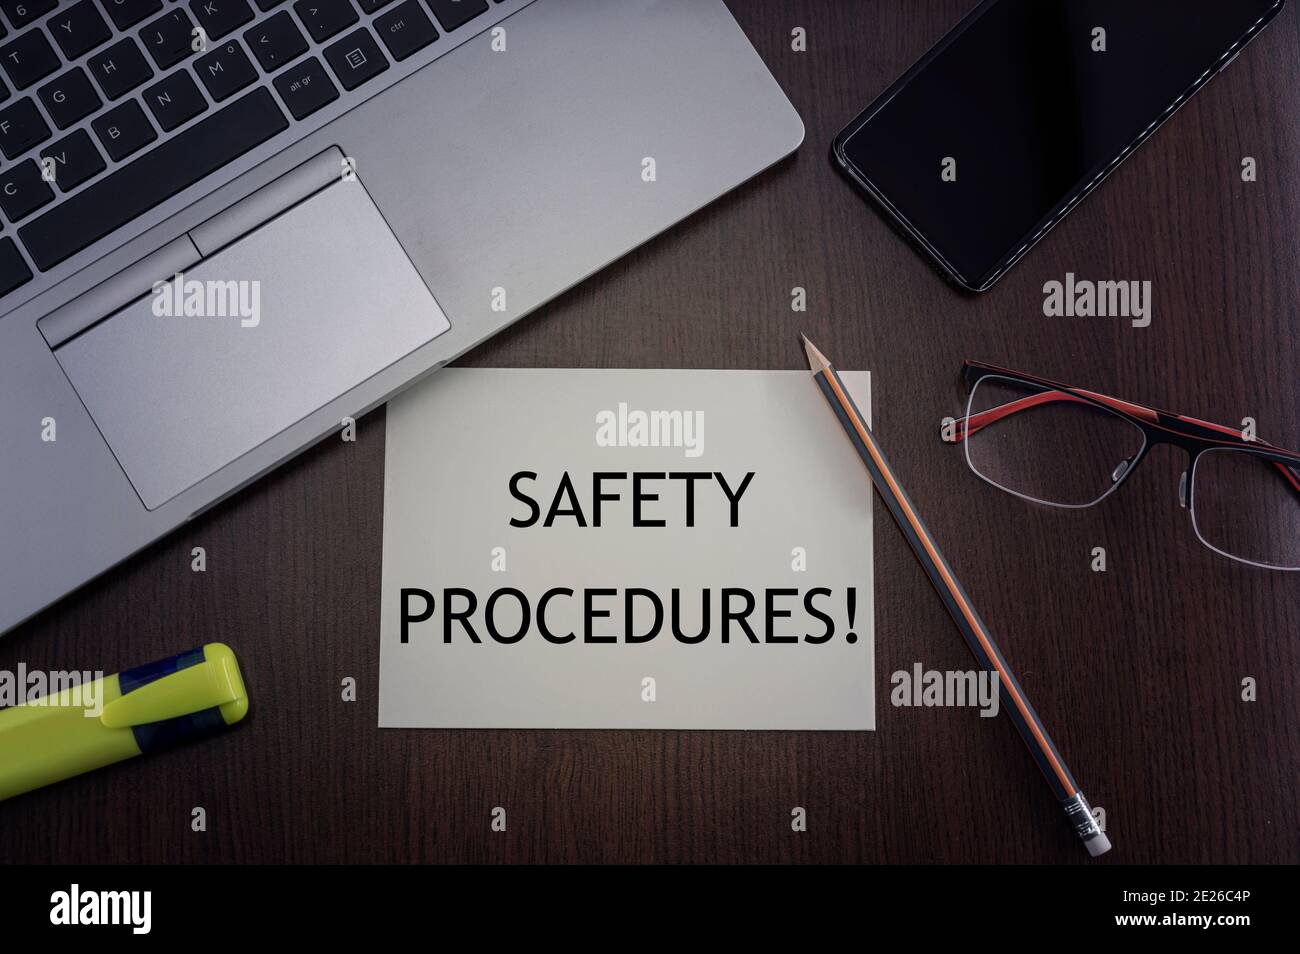 Top view of laptop, phone, glasses and pencil with card with inscription safety procedures. Stock Photo